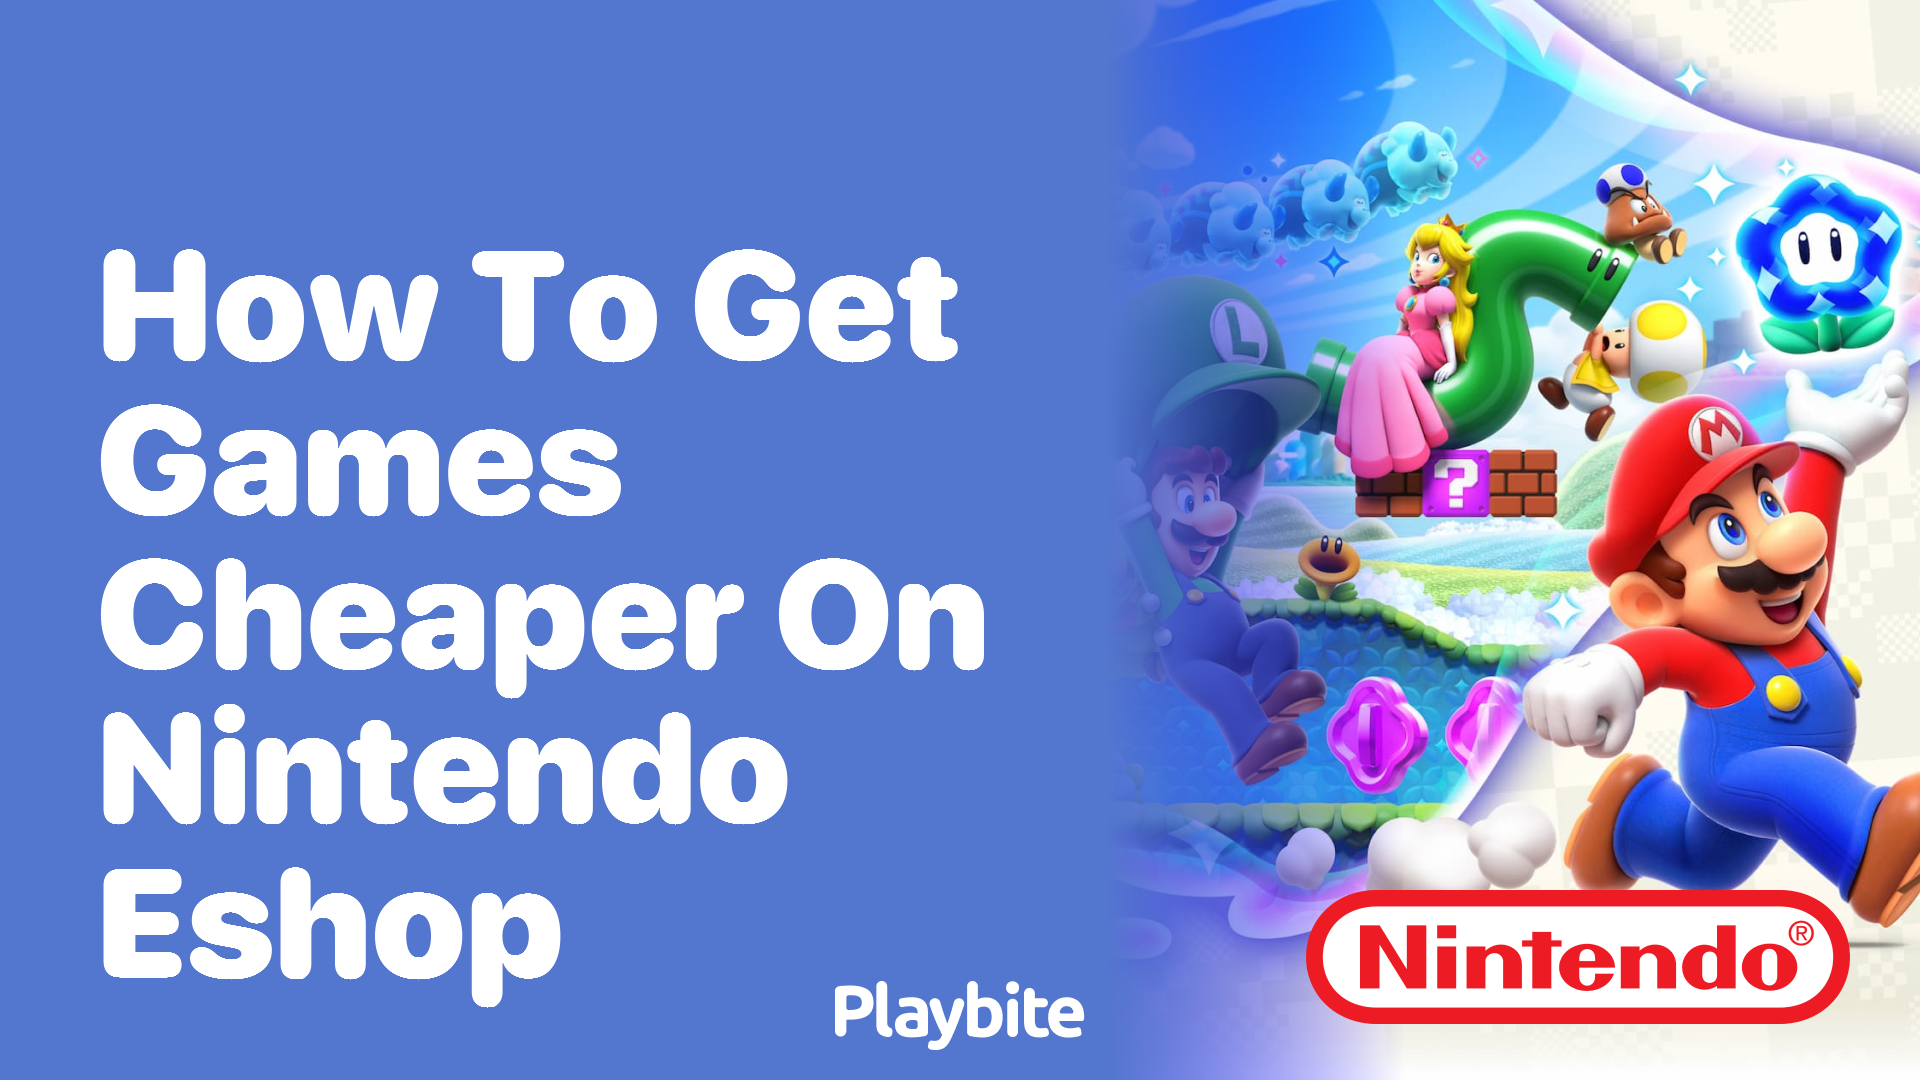 How to Get Games Cheaper on Nintendo eShop